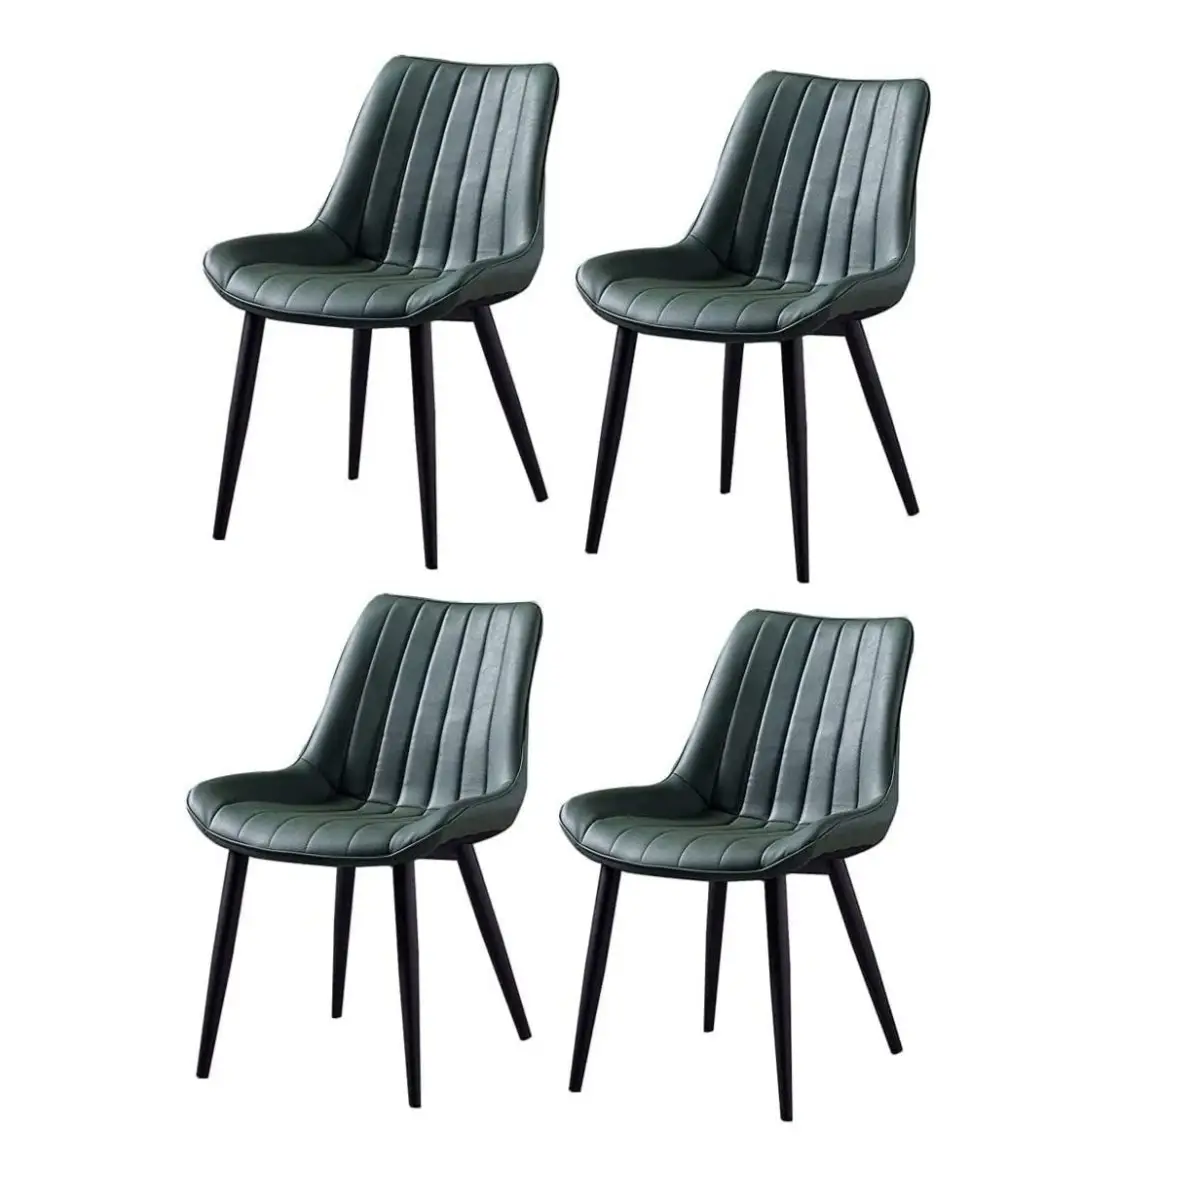 Modern Soft PU Leather Cover Thick Padded Side Chairs Vintage Home Kitchen Cafe Dining Room Chairs Set with Sturdy Metal Legs